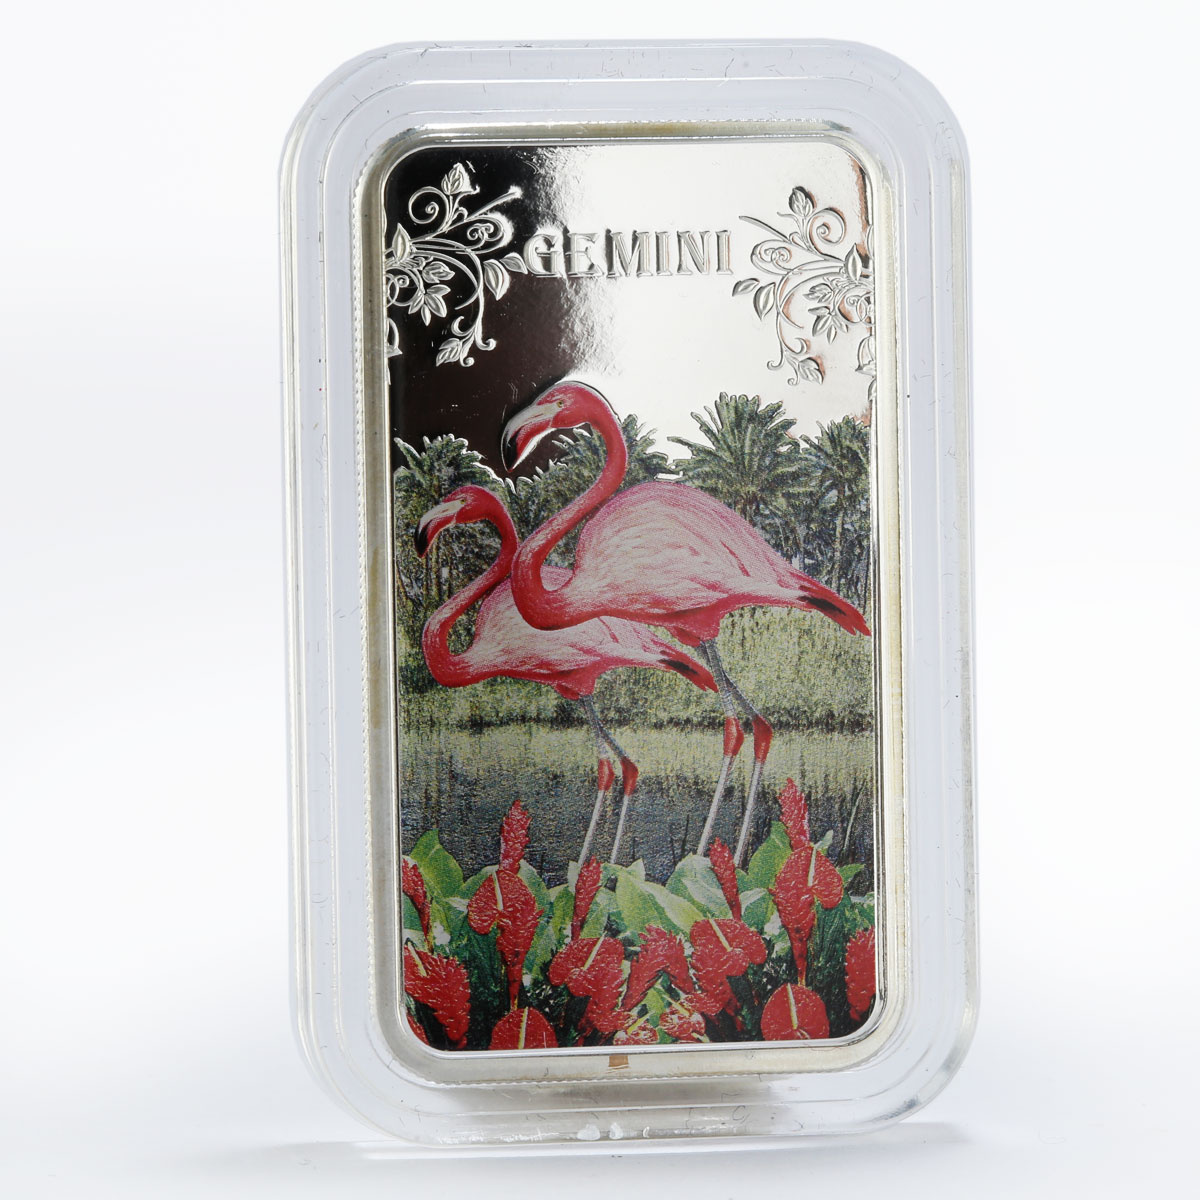 Cook Islands 1 dollar Gemini Two flamingos colored proof silver coin 2014